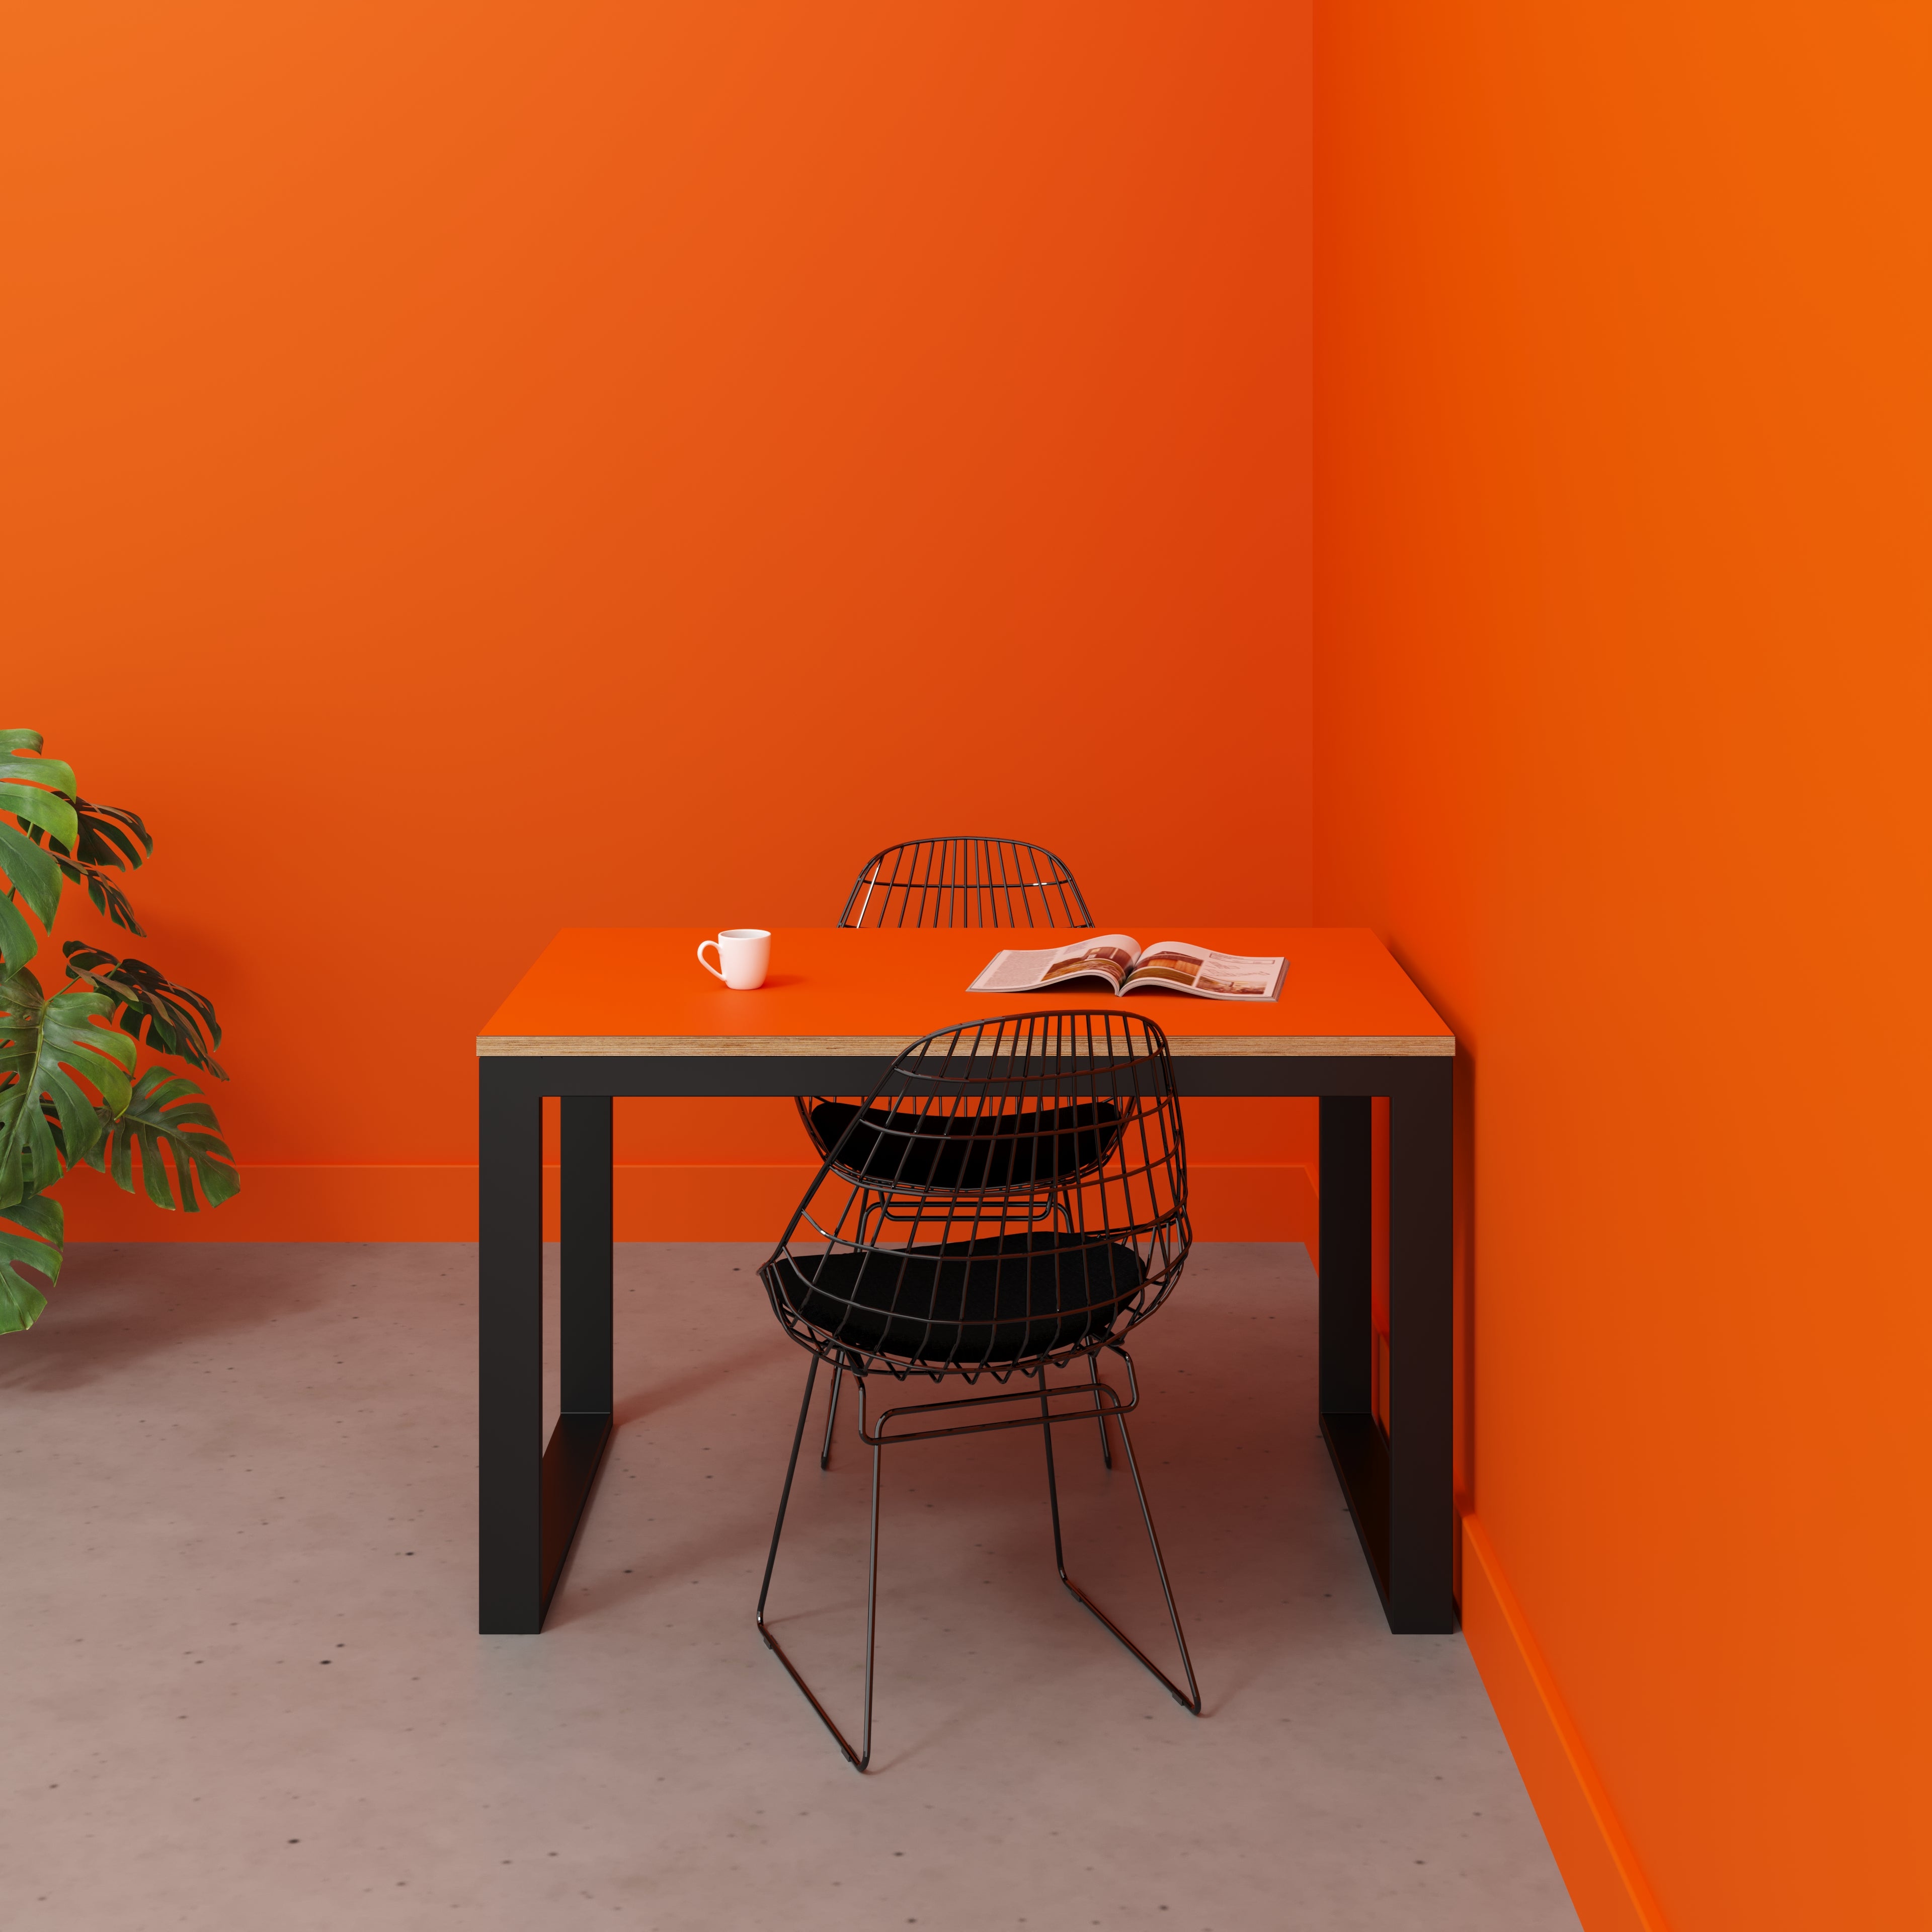 Table with Black Industrial Frame - Formica Levante Orange - 1200(w) x 745(d) x 735(h)